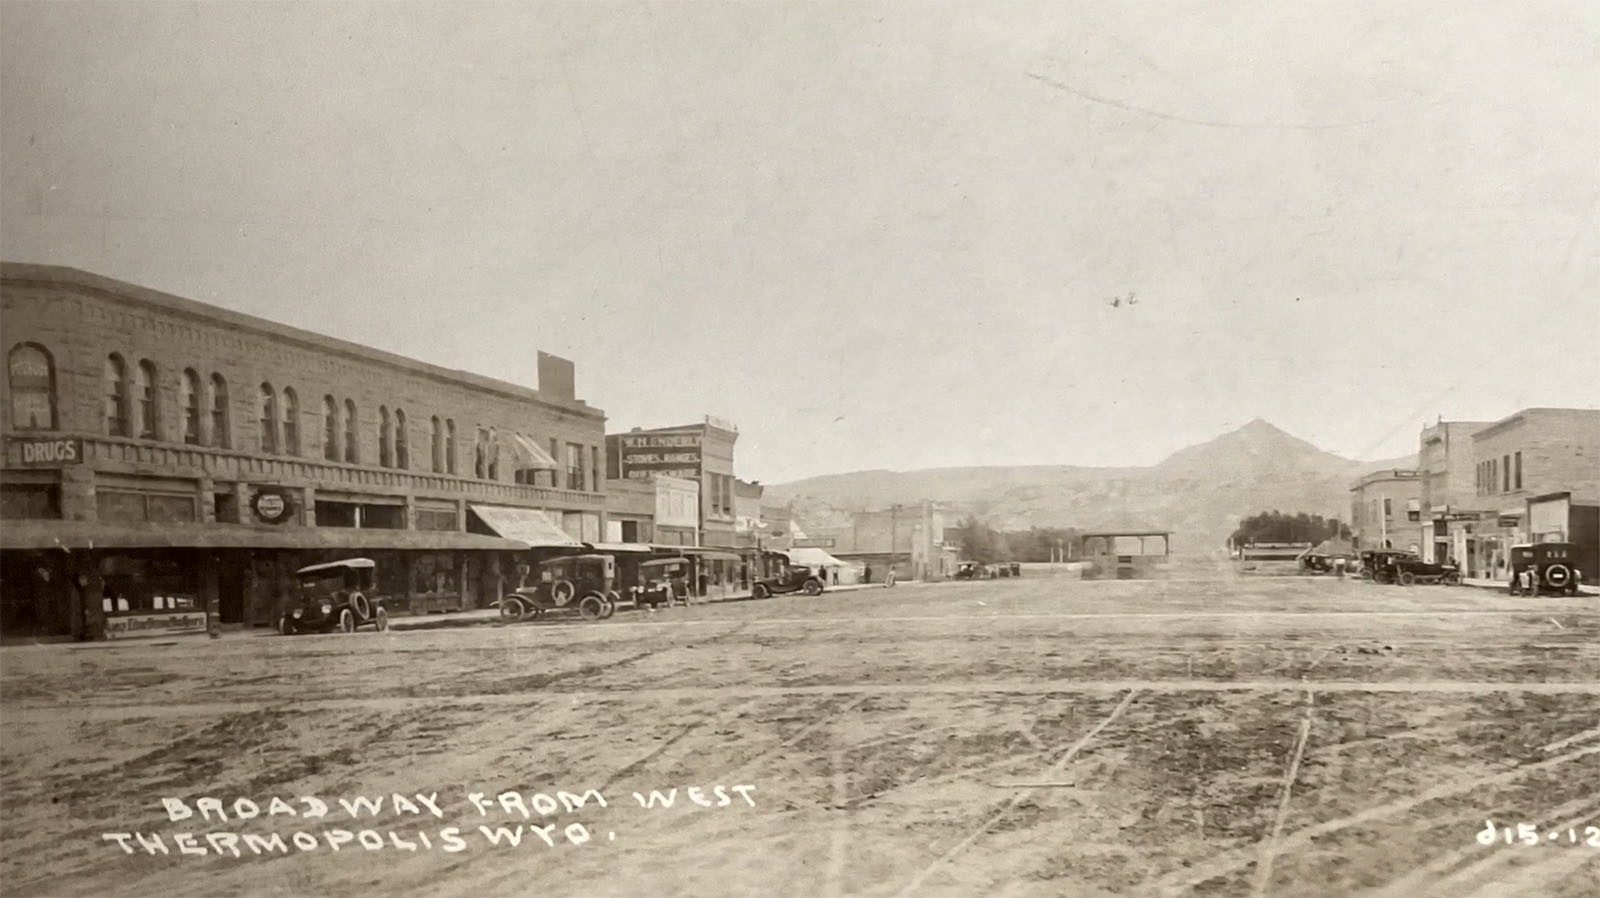 In the early days of Thermopolis, its extra-wide Main Street was very pronounced.